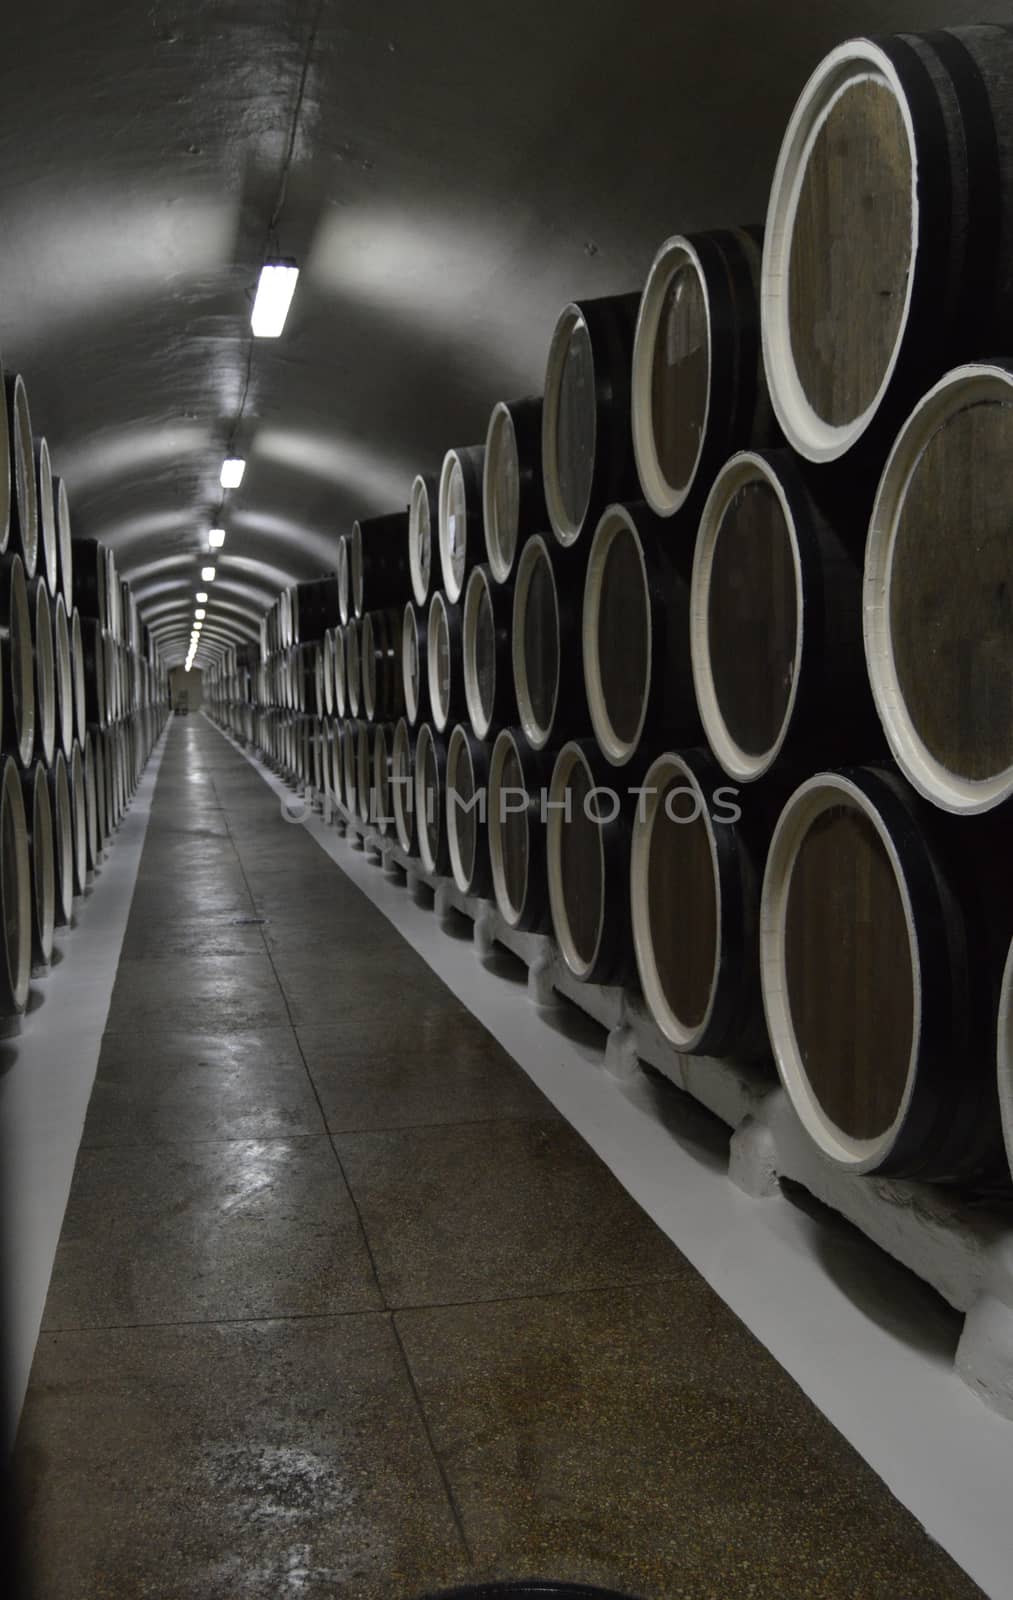 Oak barrels lie in rows in the wine cellar, storage and aging of wine.